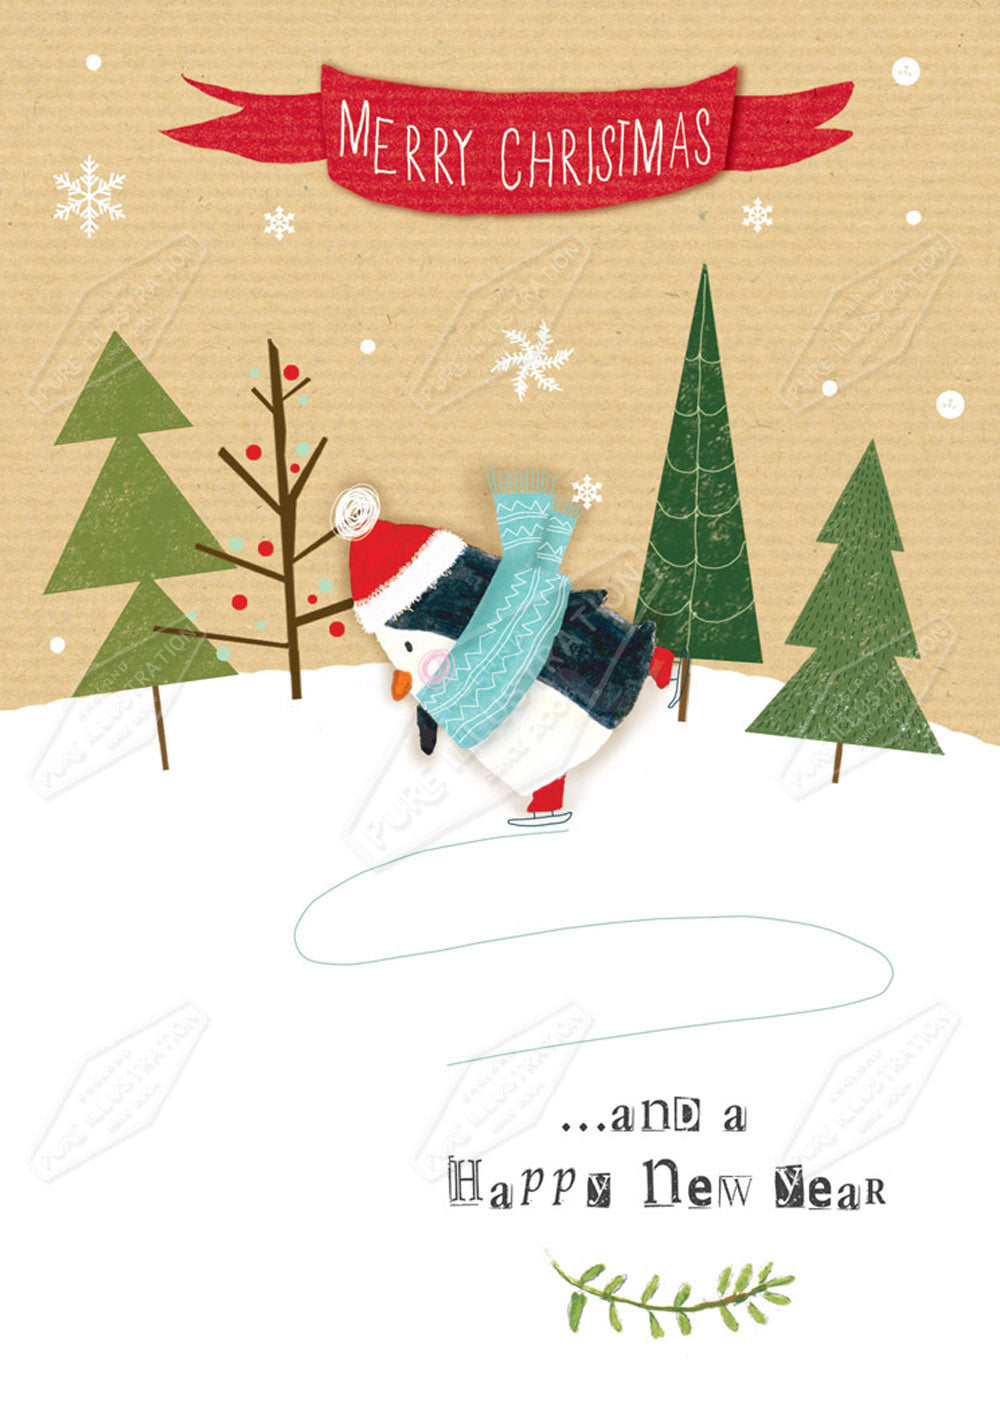 00029581CRE - Skating Penguin Illustration by Cory Reid - Pure Art Licensing & Surface Design Agents International